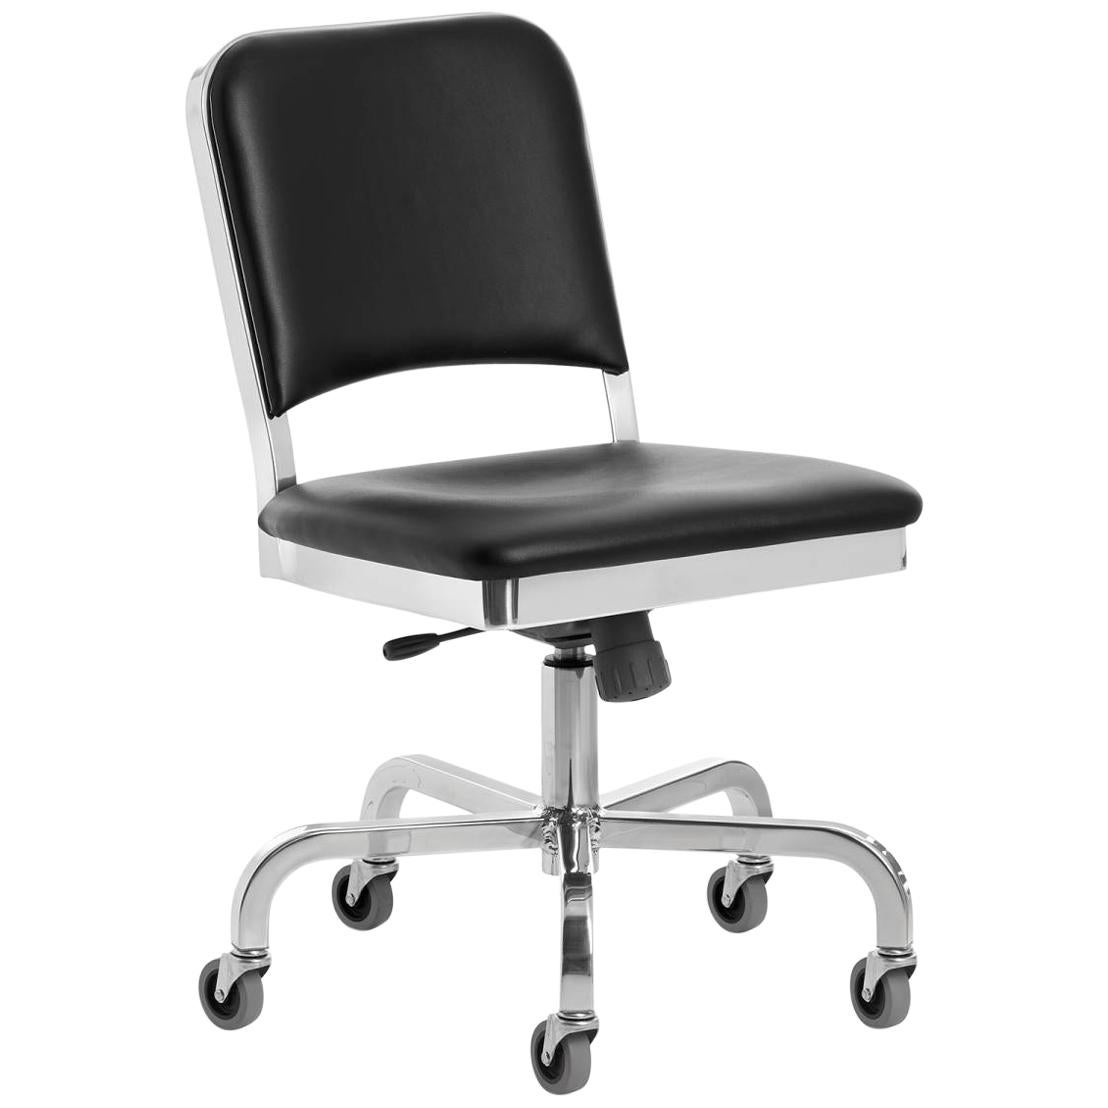 Emeco Navy Swivel Chair in Polished Aluminum and Black Upholstery by US Navy